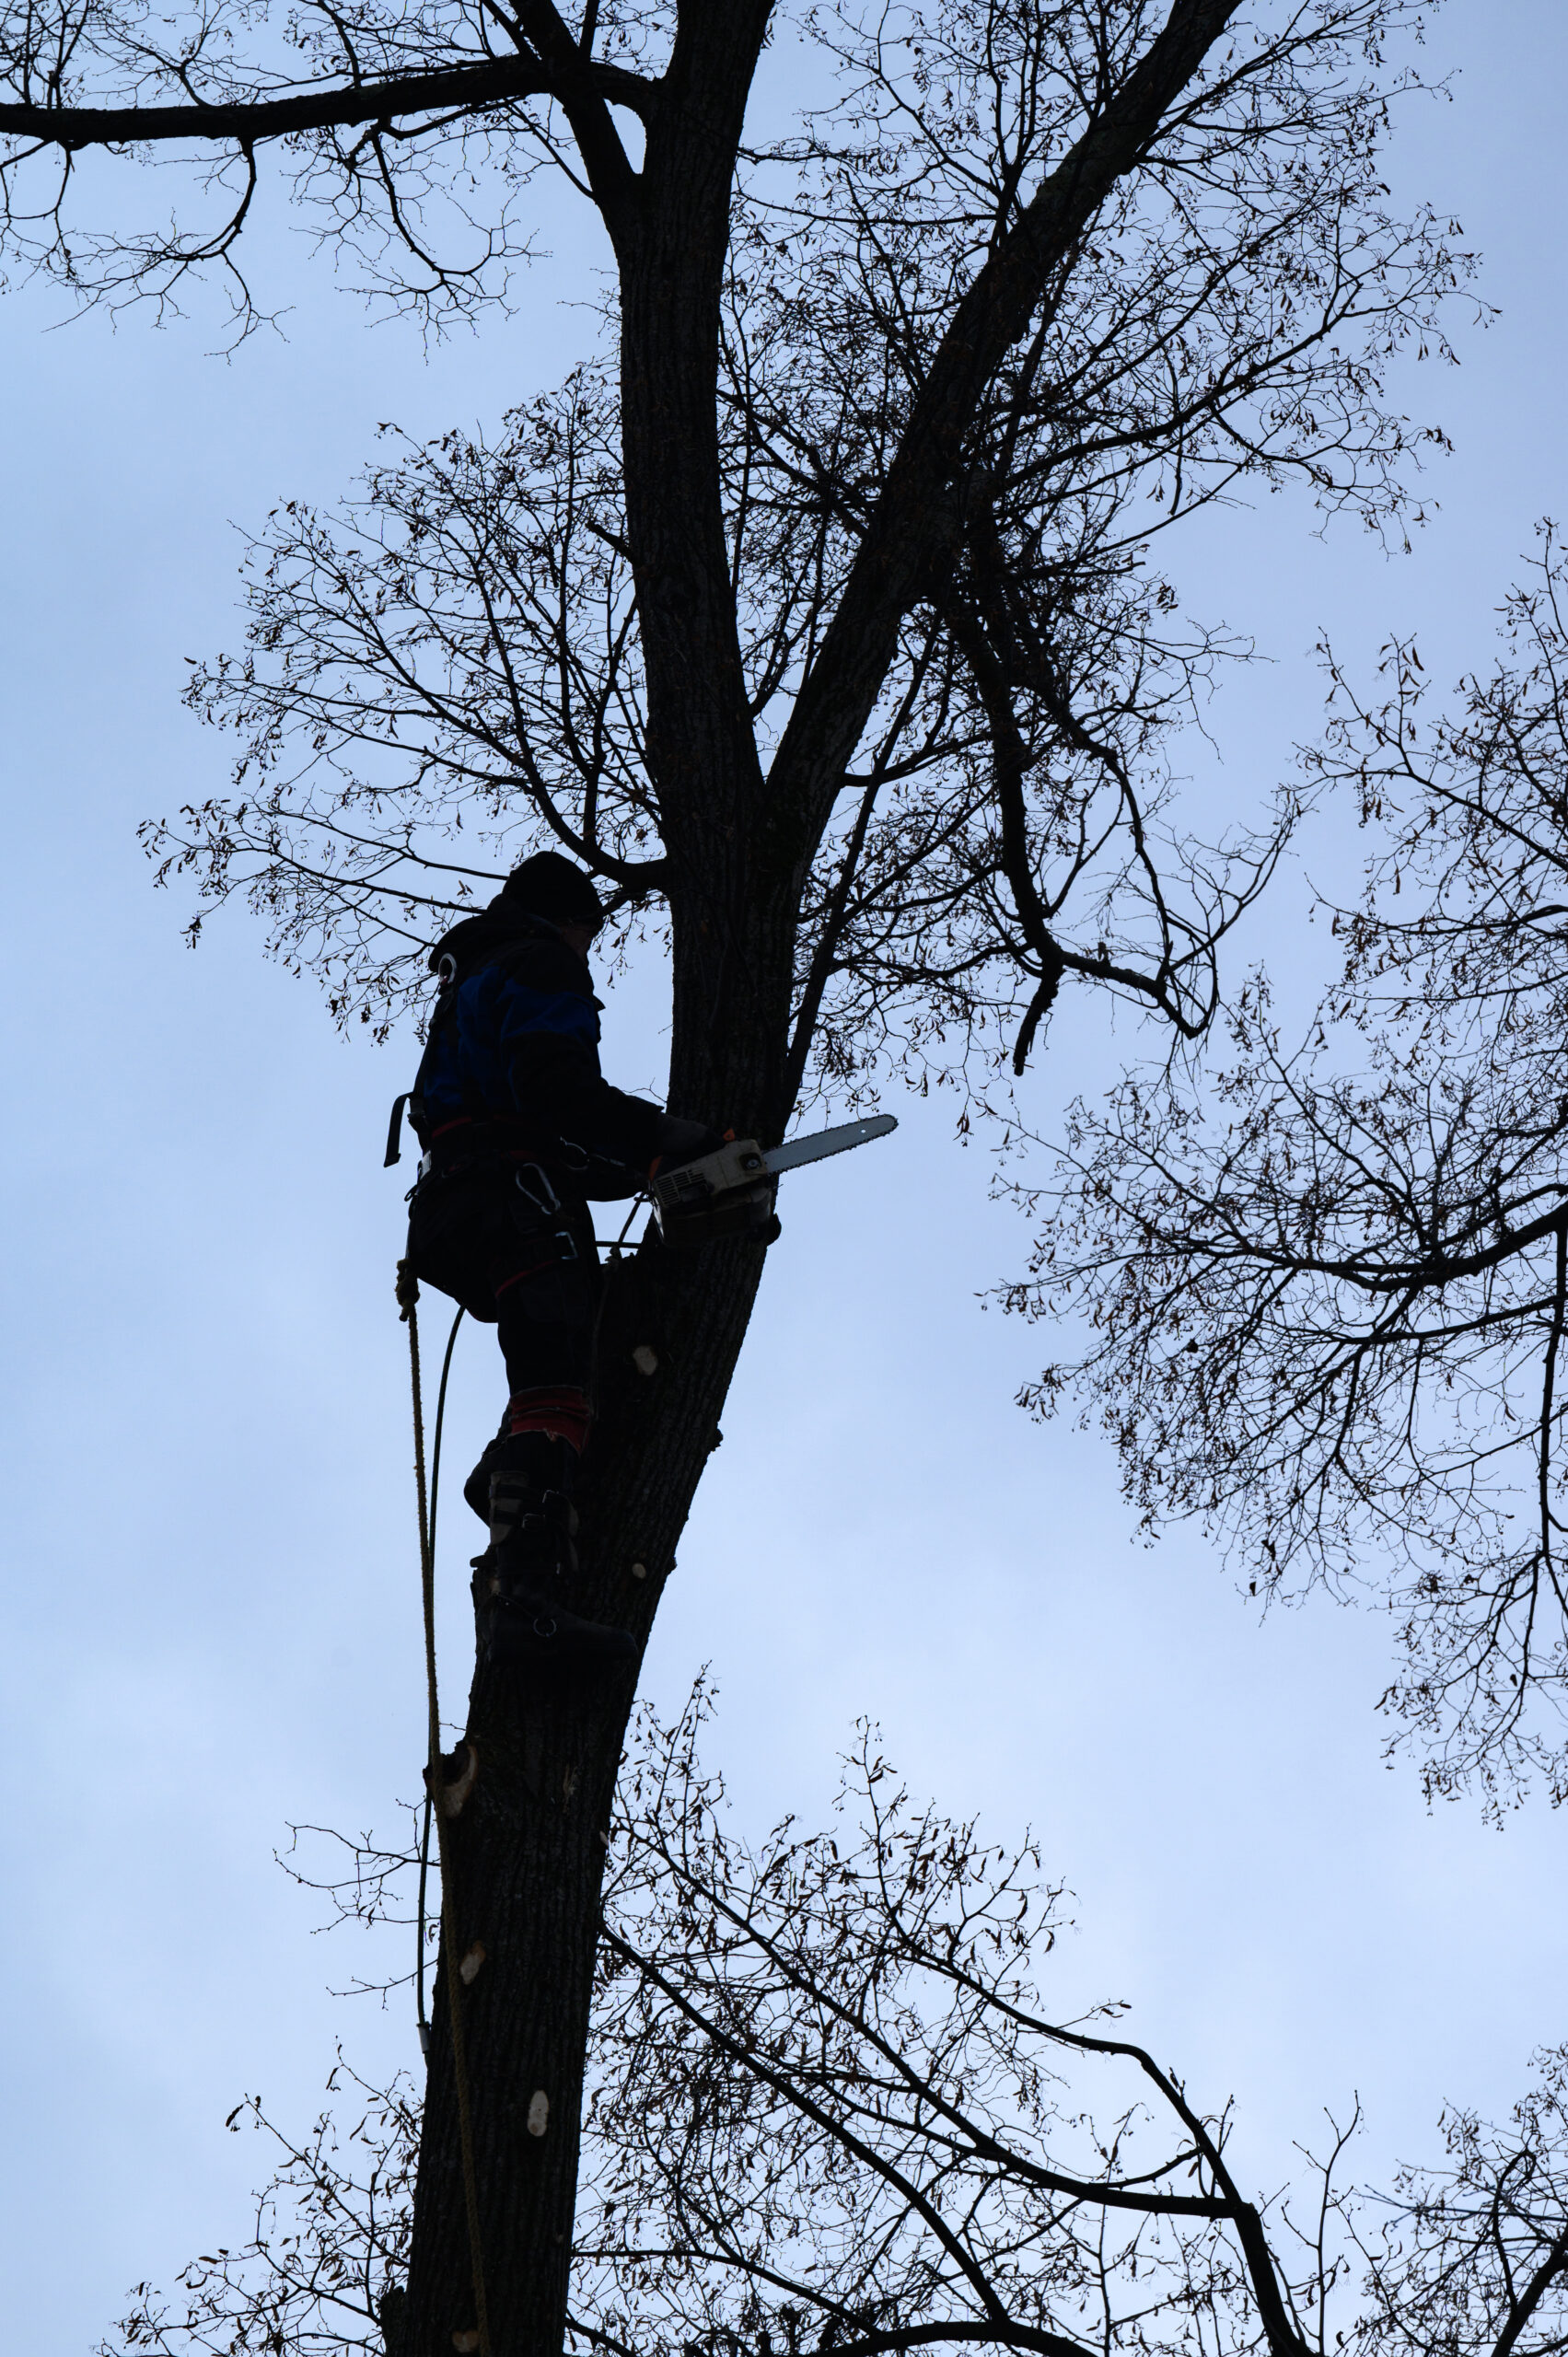 Explore our blog post 'Choose a Professional Tree Removal Service: When and Why' to uncover reasons for needing tree removal, optimal timing, and the importance of professional services. Learn how to maintain the safety and aesthetics of your property.